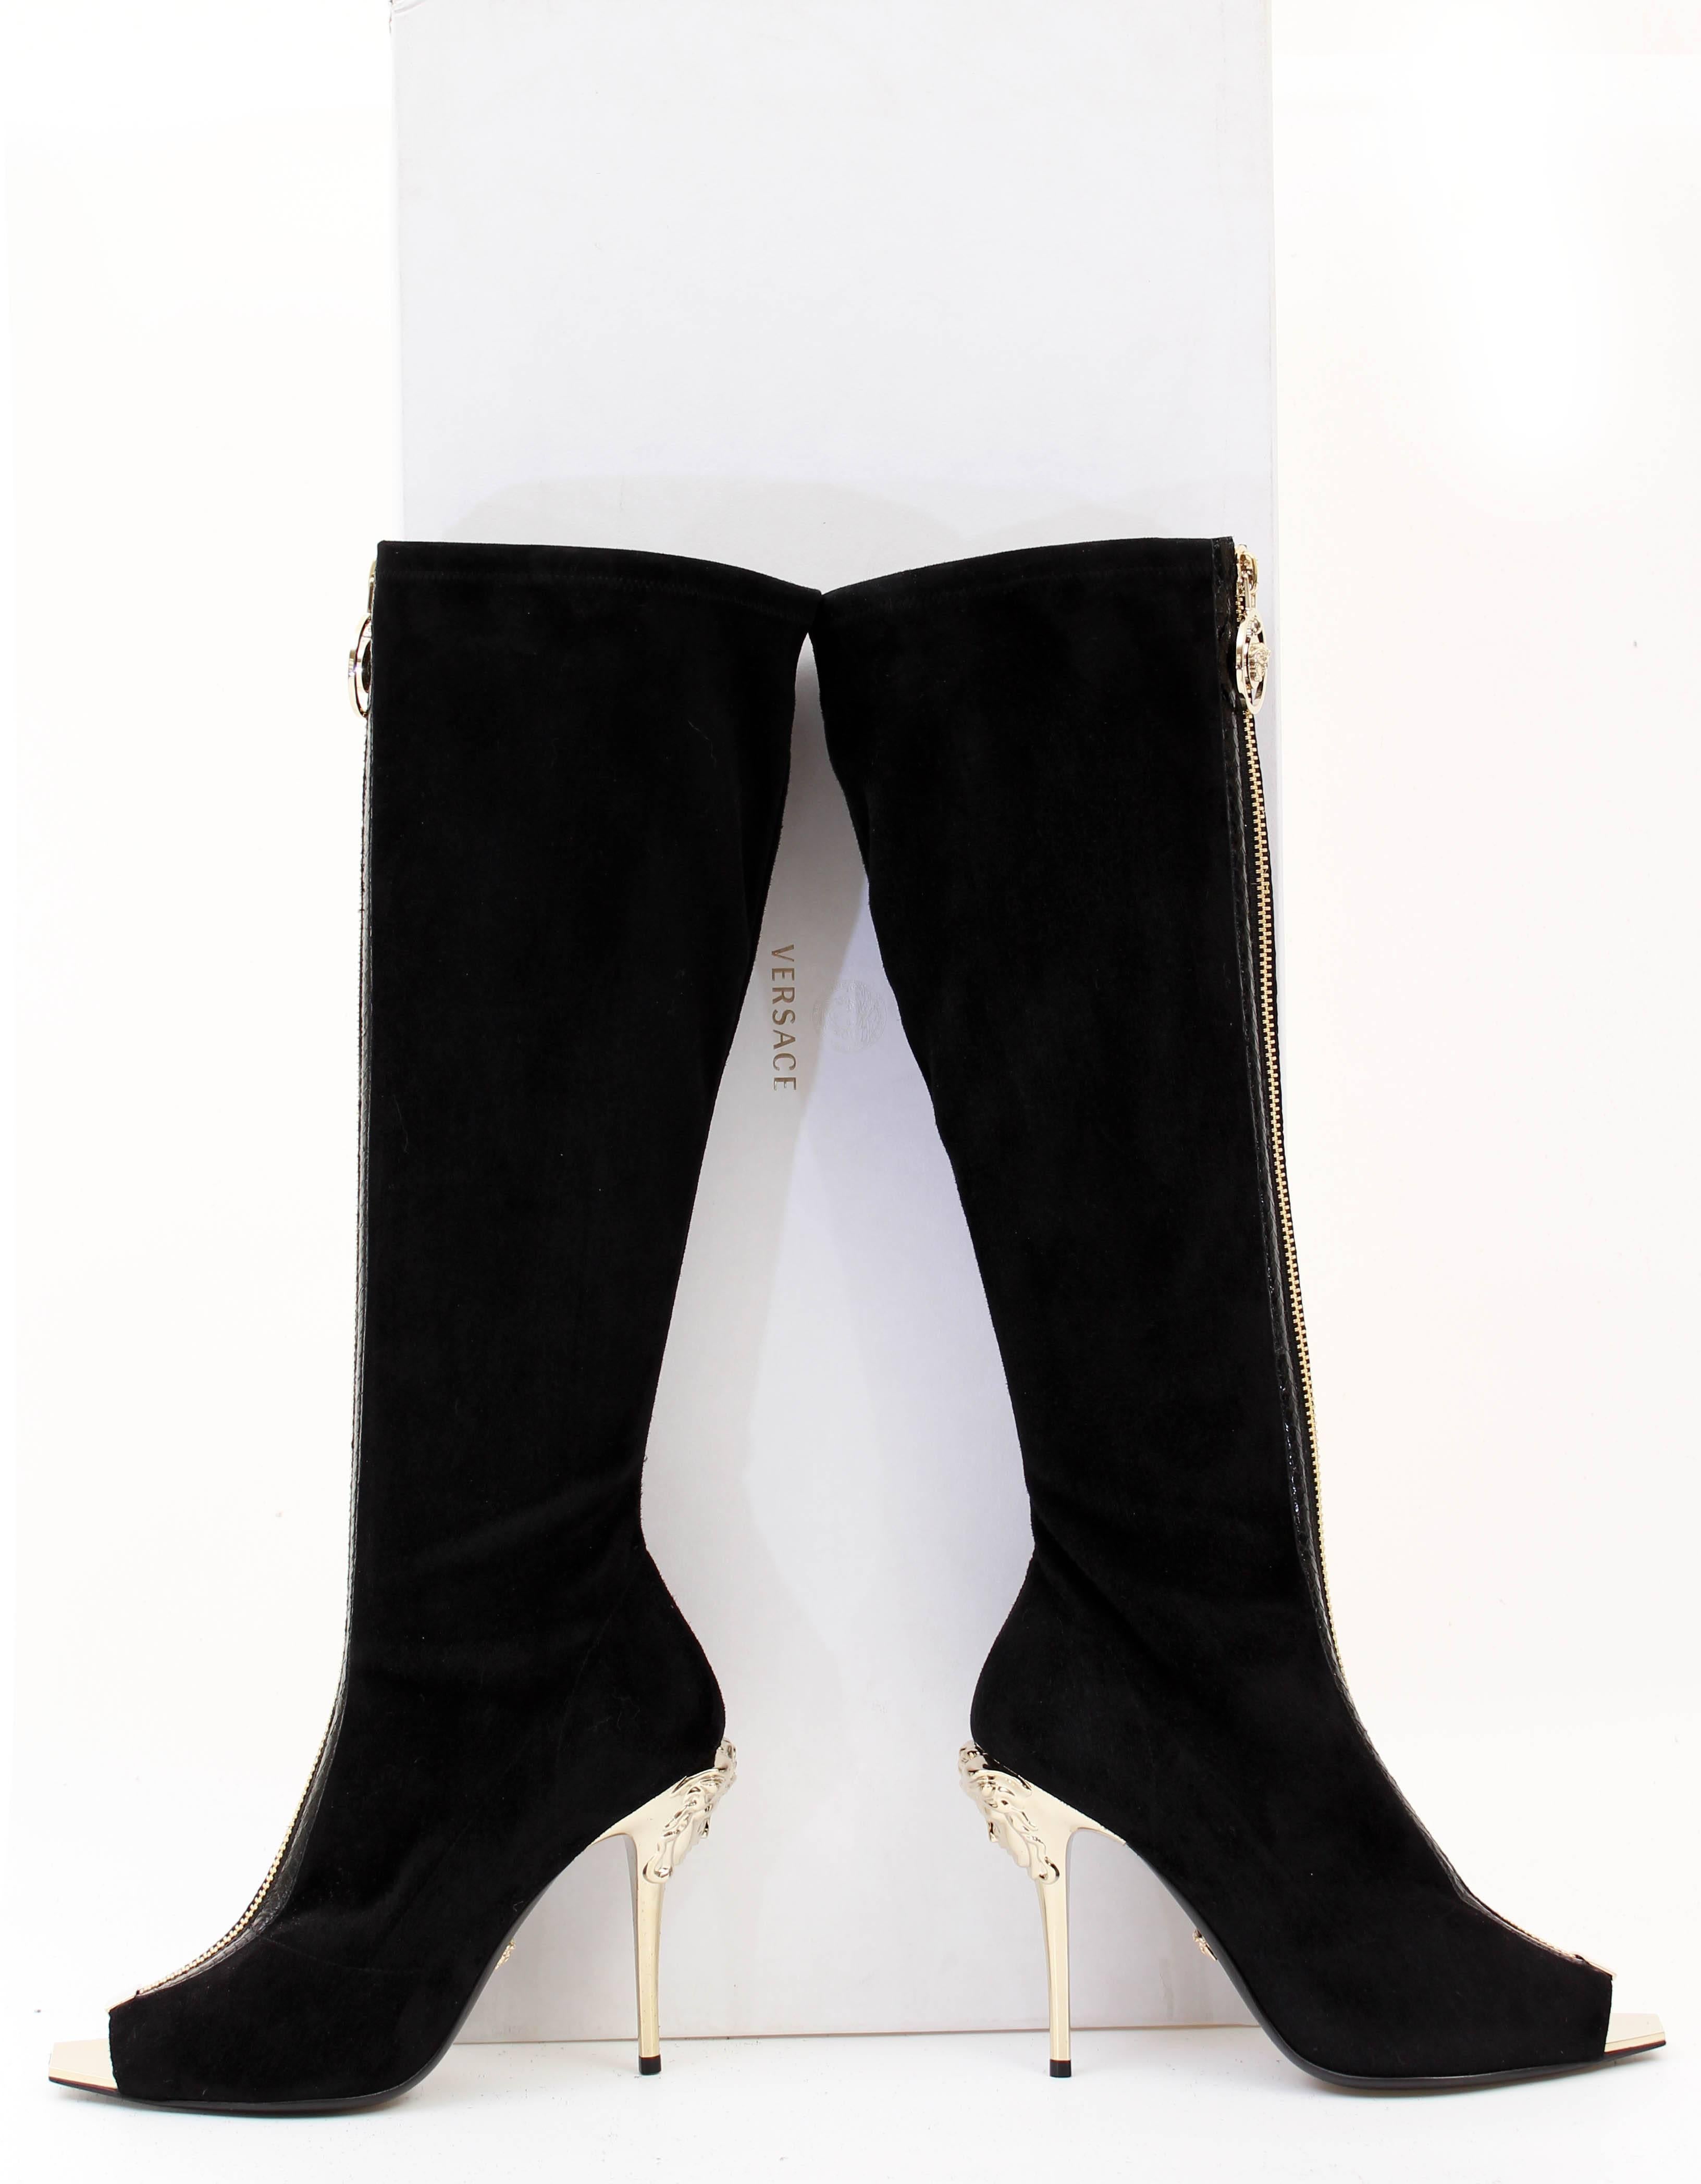 Women's New VERSACE Knee High Black Suede Boots with gold Medusa heel and open toe